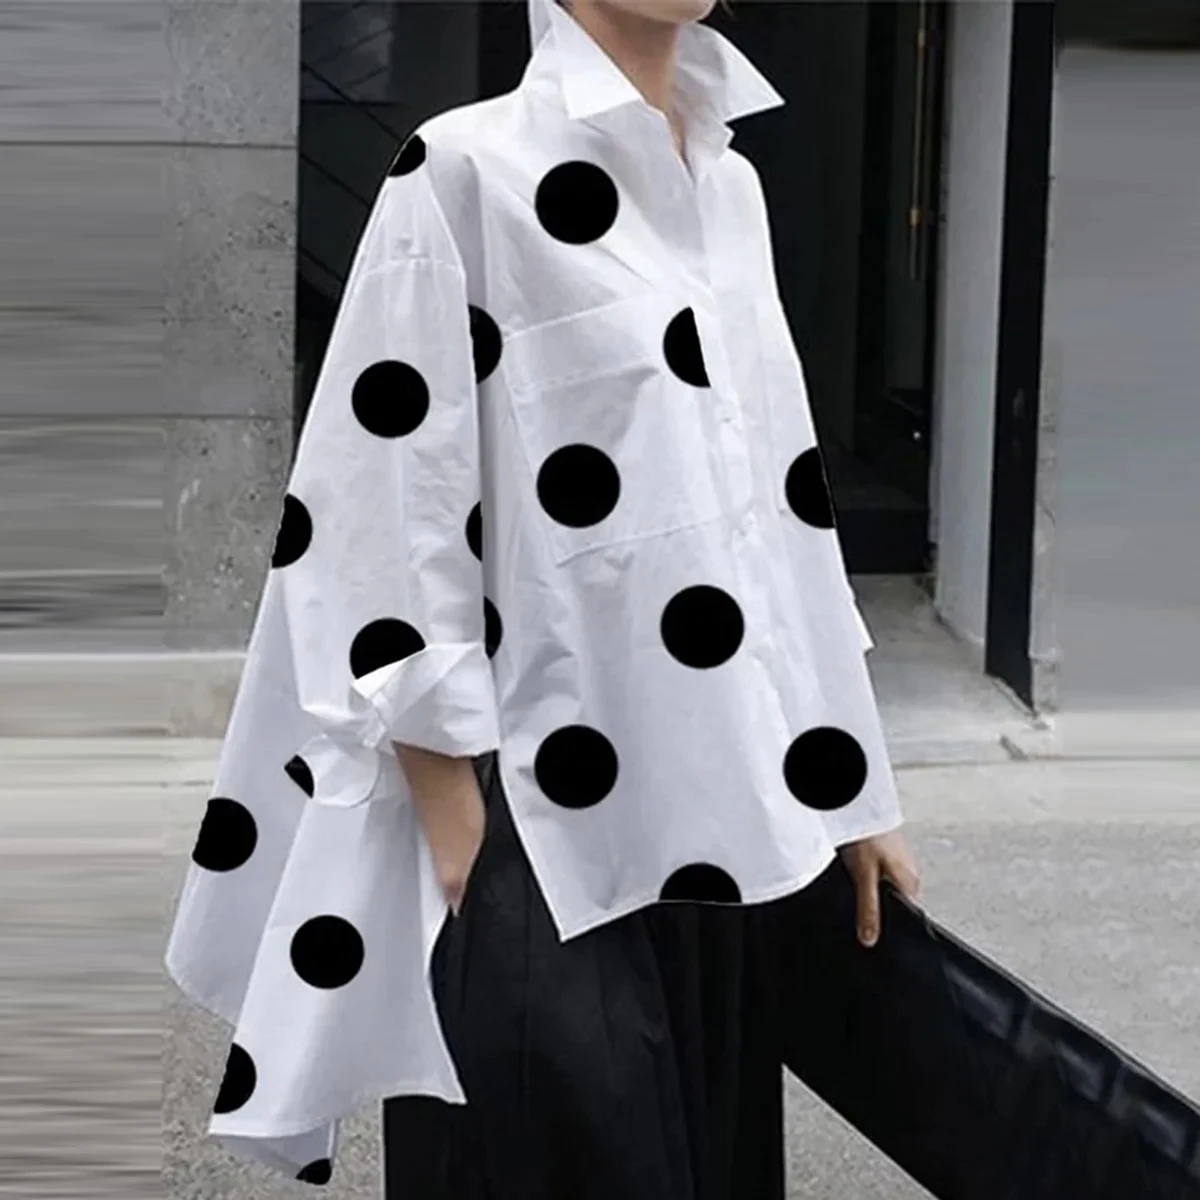 Uslemon Polka-Dot Blouse Split-Side Lapel Long Sleeves Fashion Buttoned High-Low Casual Simple Office Lady Shirts For Women